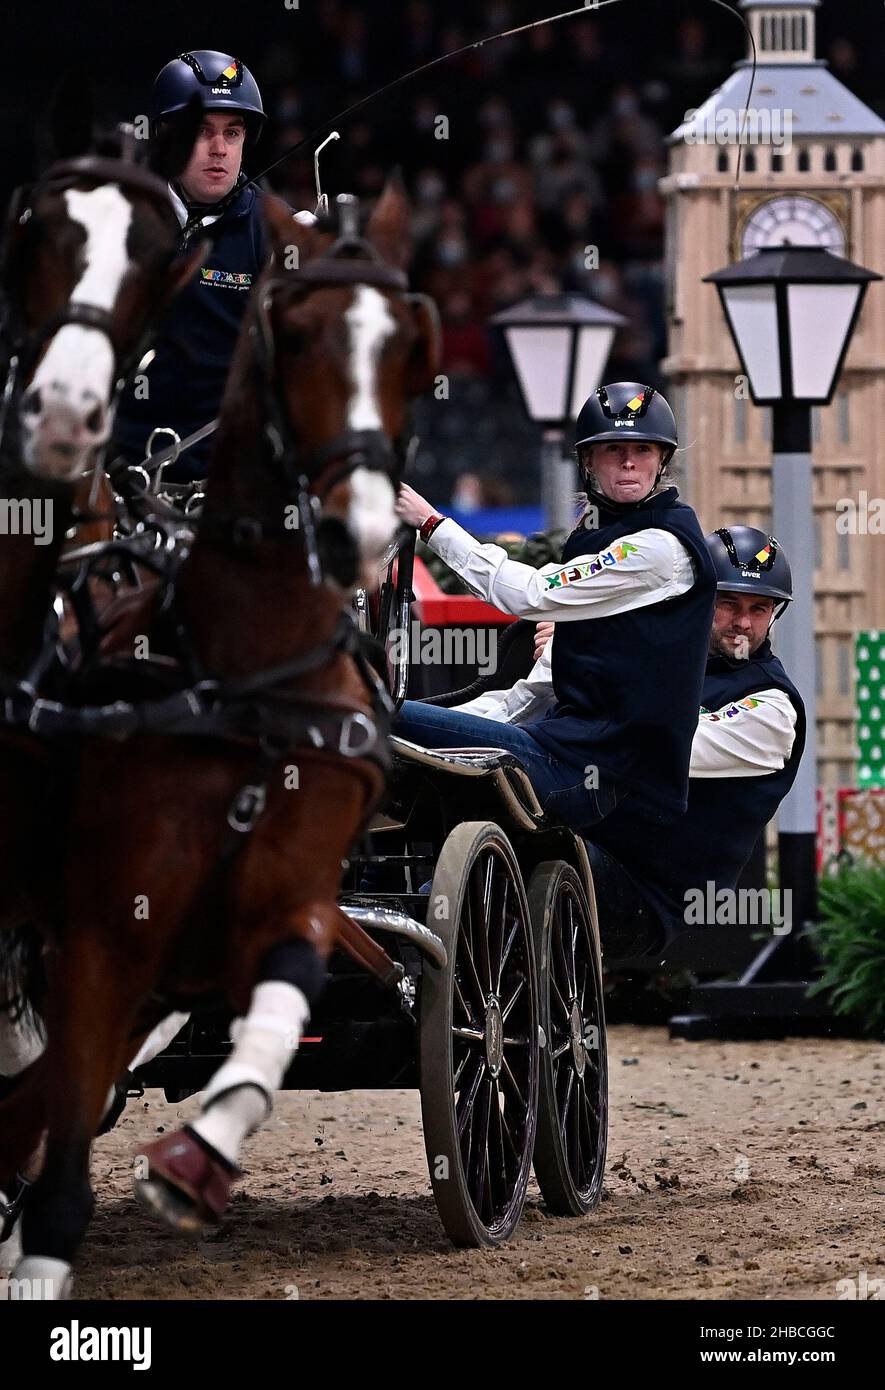 Royal Victoria Dock, United Kingdom. 18th Dec, 2021. London International Horse Show. Excel London. Royal Victoria Dock. Dries Degrieck (BEL) with horses DAGERAAD, FREDERIK-JANE, HUNTER and KANE B during class 13 - The FEI Driving World Cup. Credit: Sport In Pictures/Alamy Live News Stock Photo